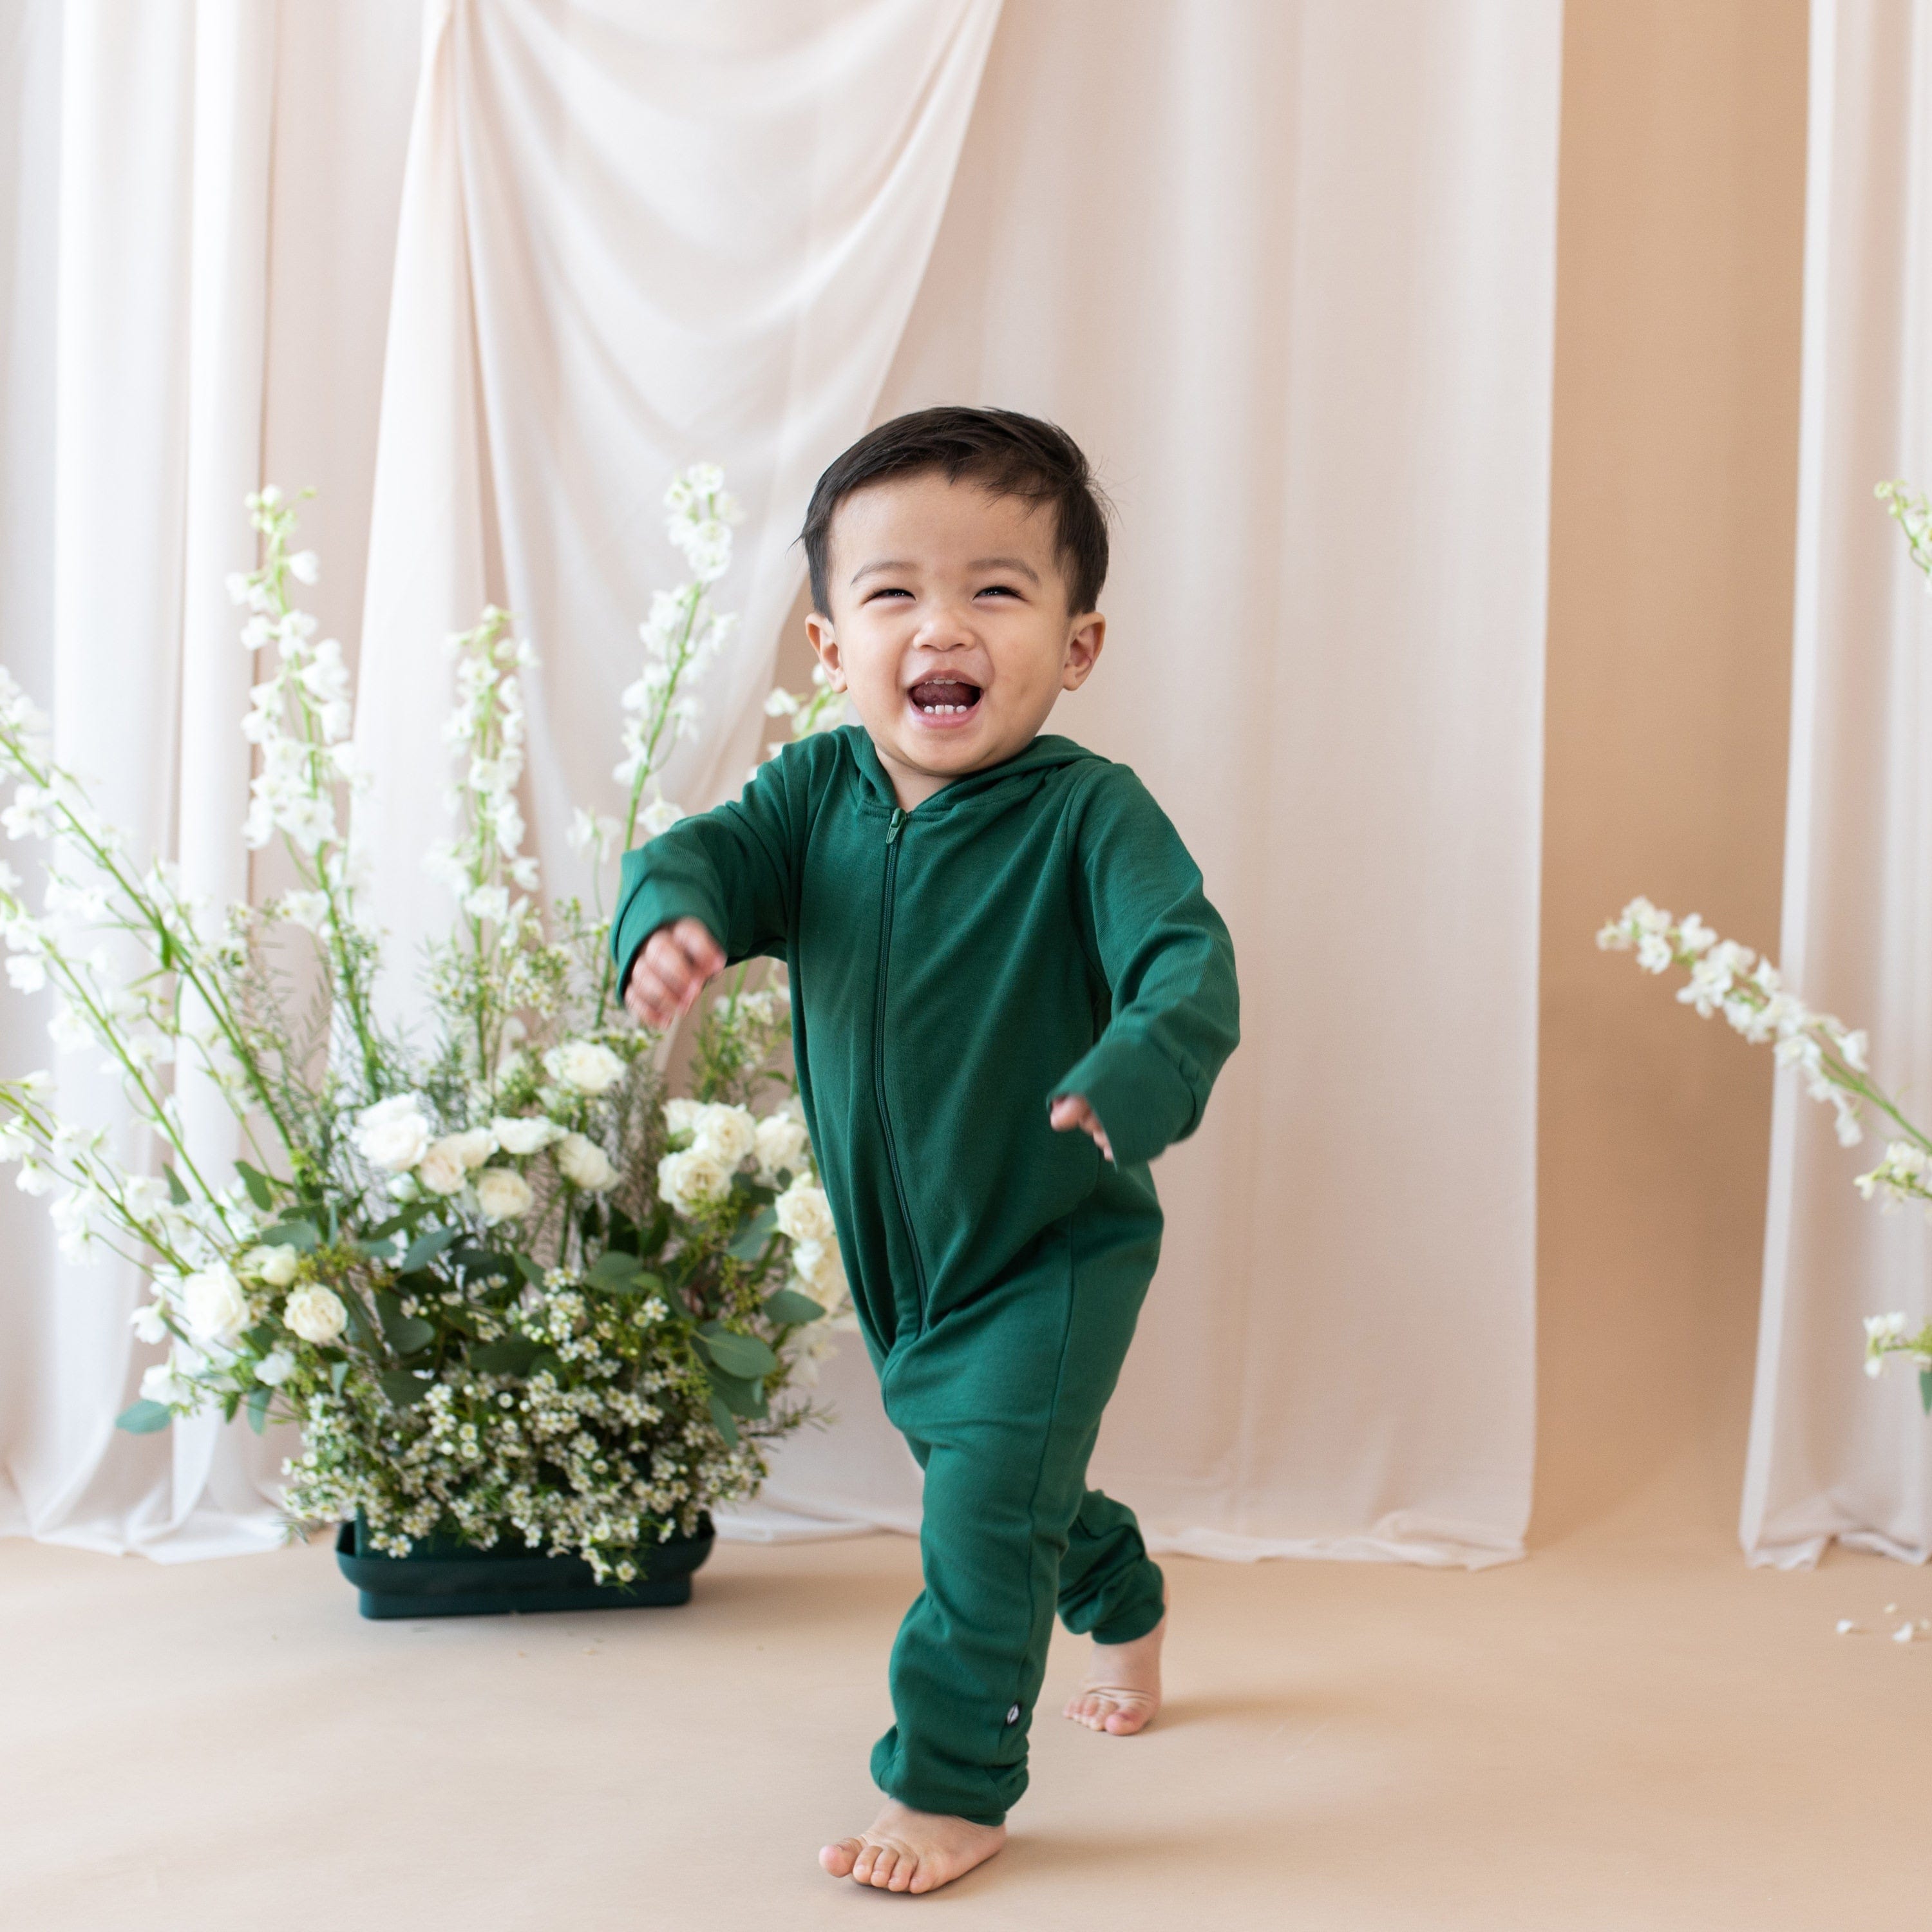 Kyte Baby Hooded Zippered Romper Bamboo Jersey Hooded Zippered Romper in Forest